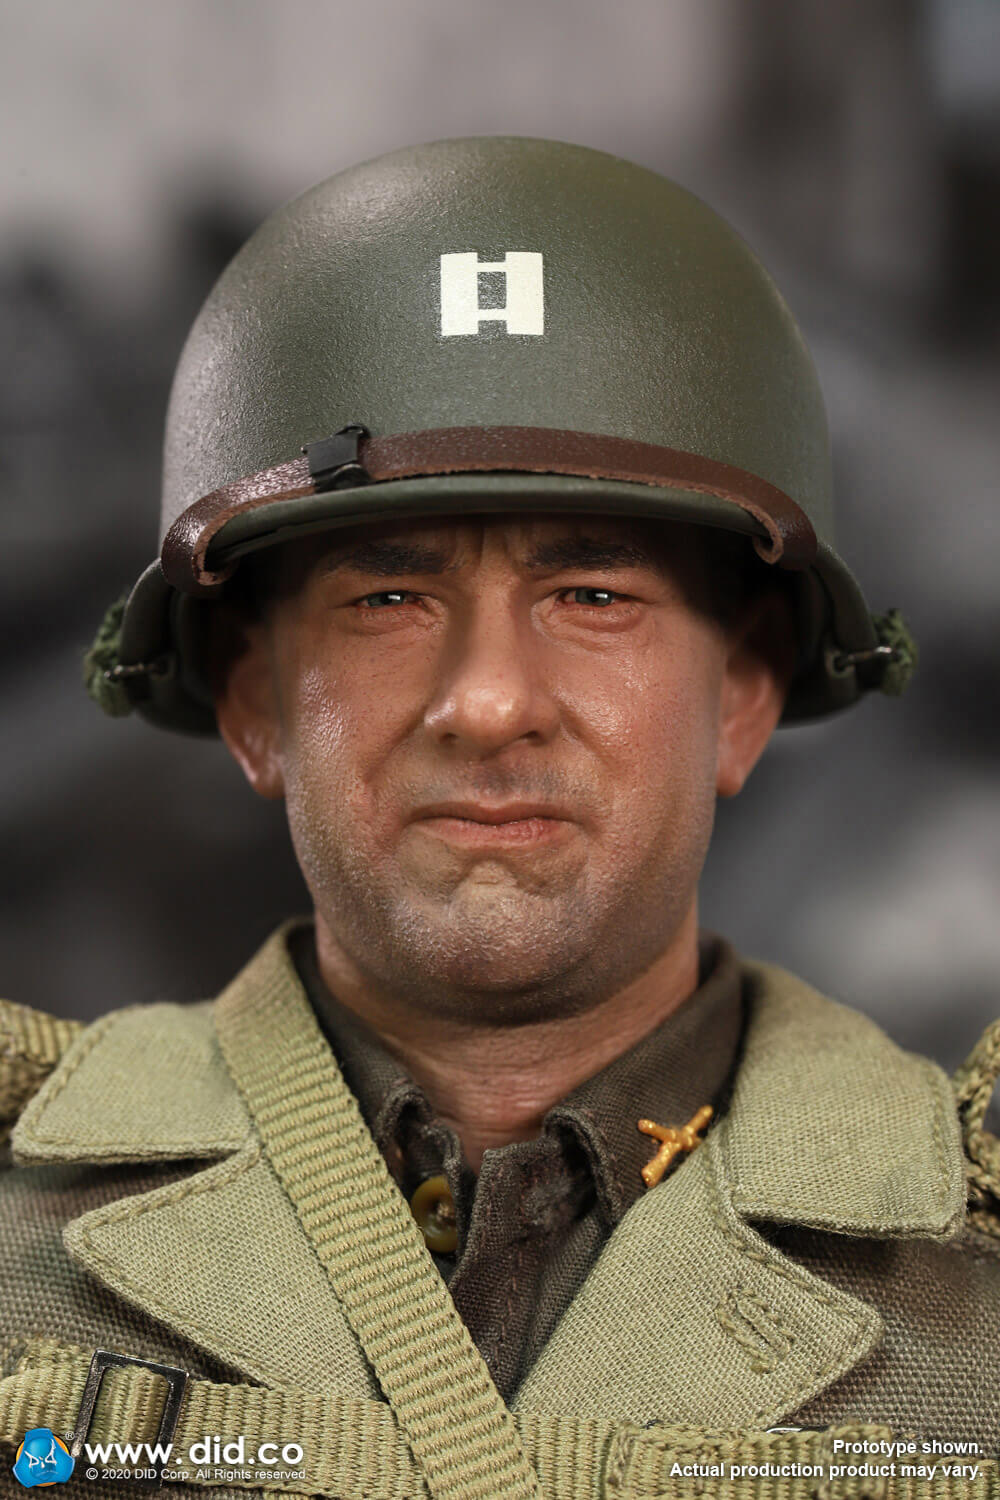 US2ndRangerBattalion - NEW PRODUCT: DiD: A80145 1/6 scale WWII US 2nd Ranger Battalion Series 3 Captain Miller 2659